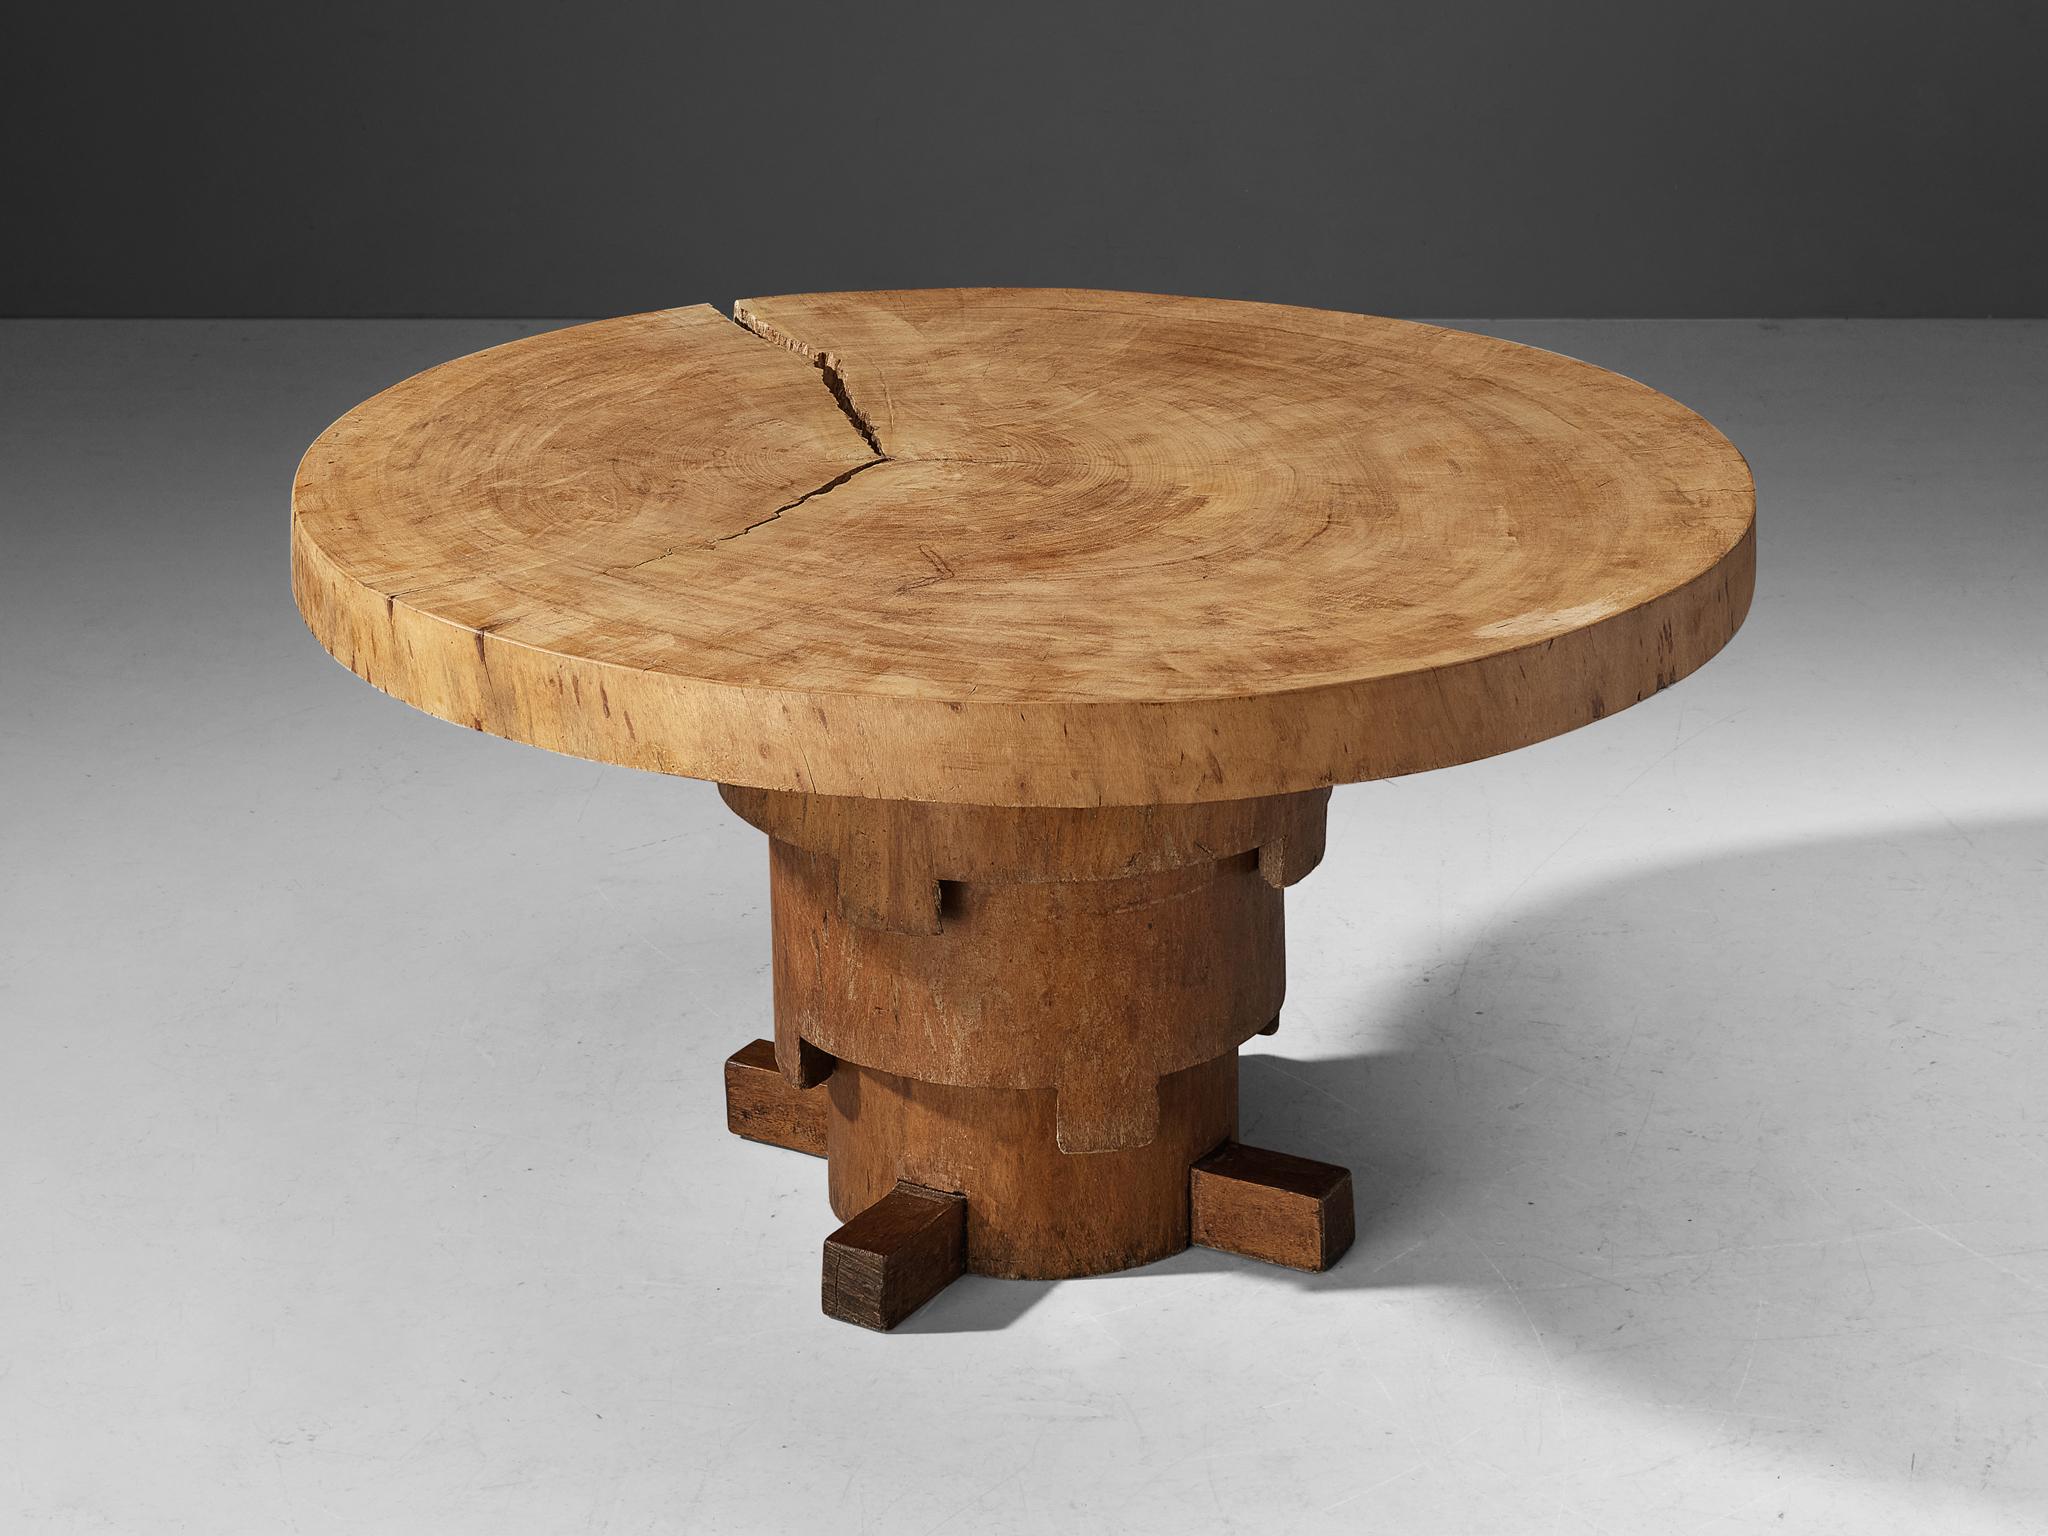 José Zanine Caldas, unique dining table 'Denuncia', Brazilian hardwood, Brazil, 1970s 

This remarkable hand-carved table is the handiwork of the Brazilian artist José Zanine Caldas. This table belongs to the Denuncia series, a collection crafted by